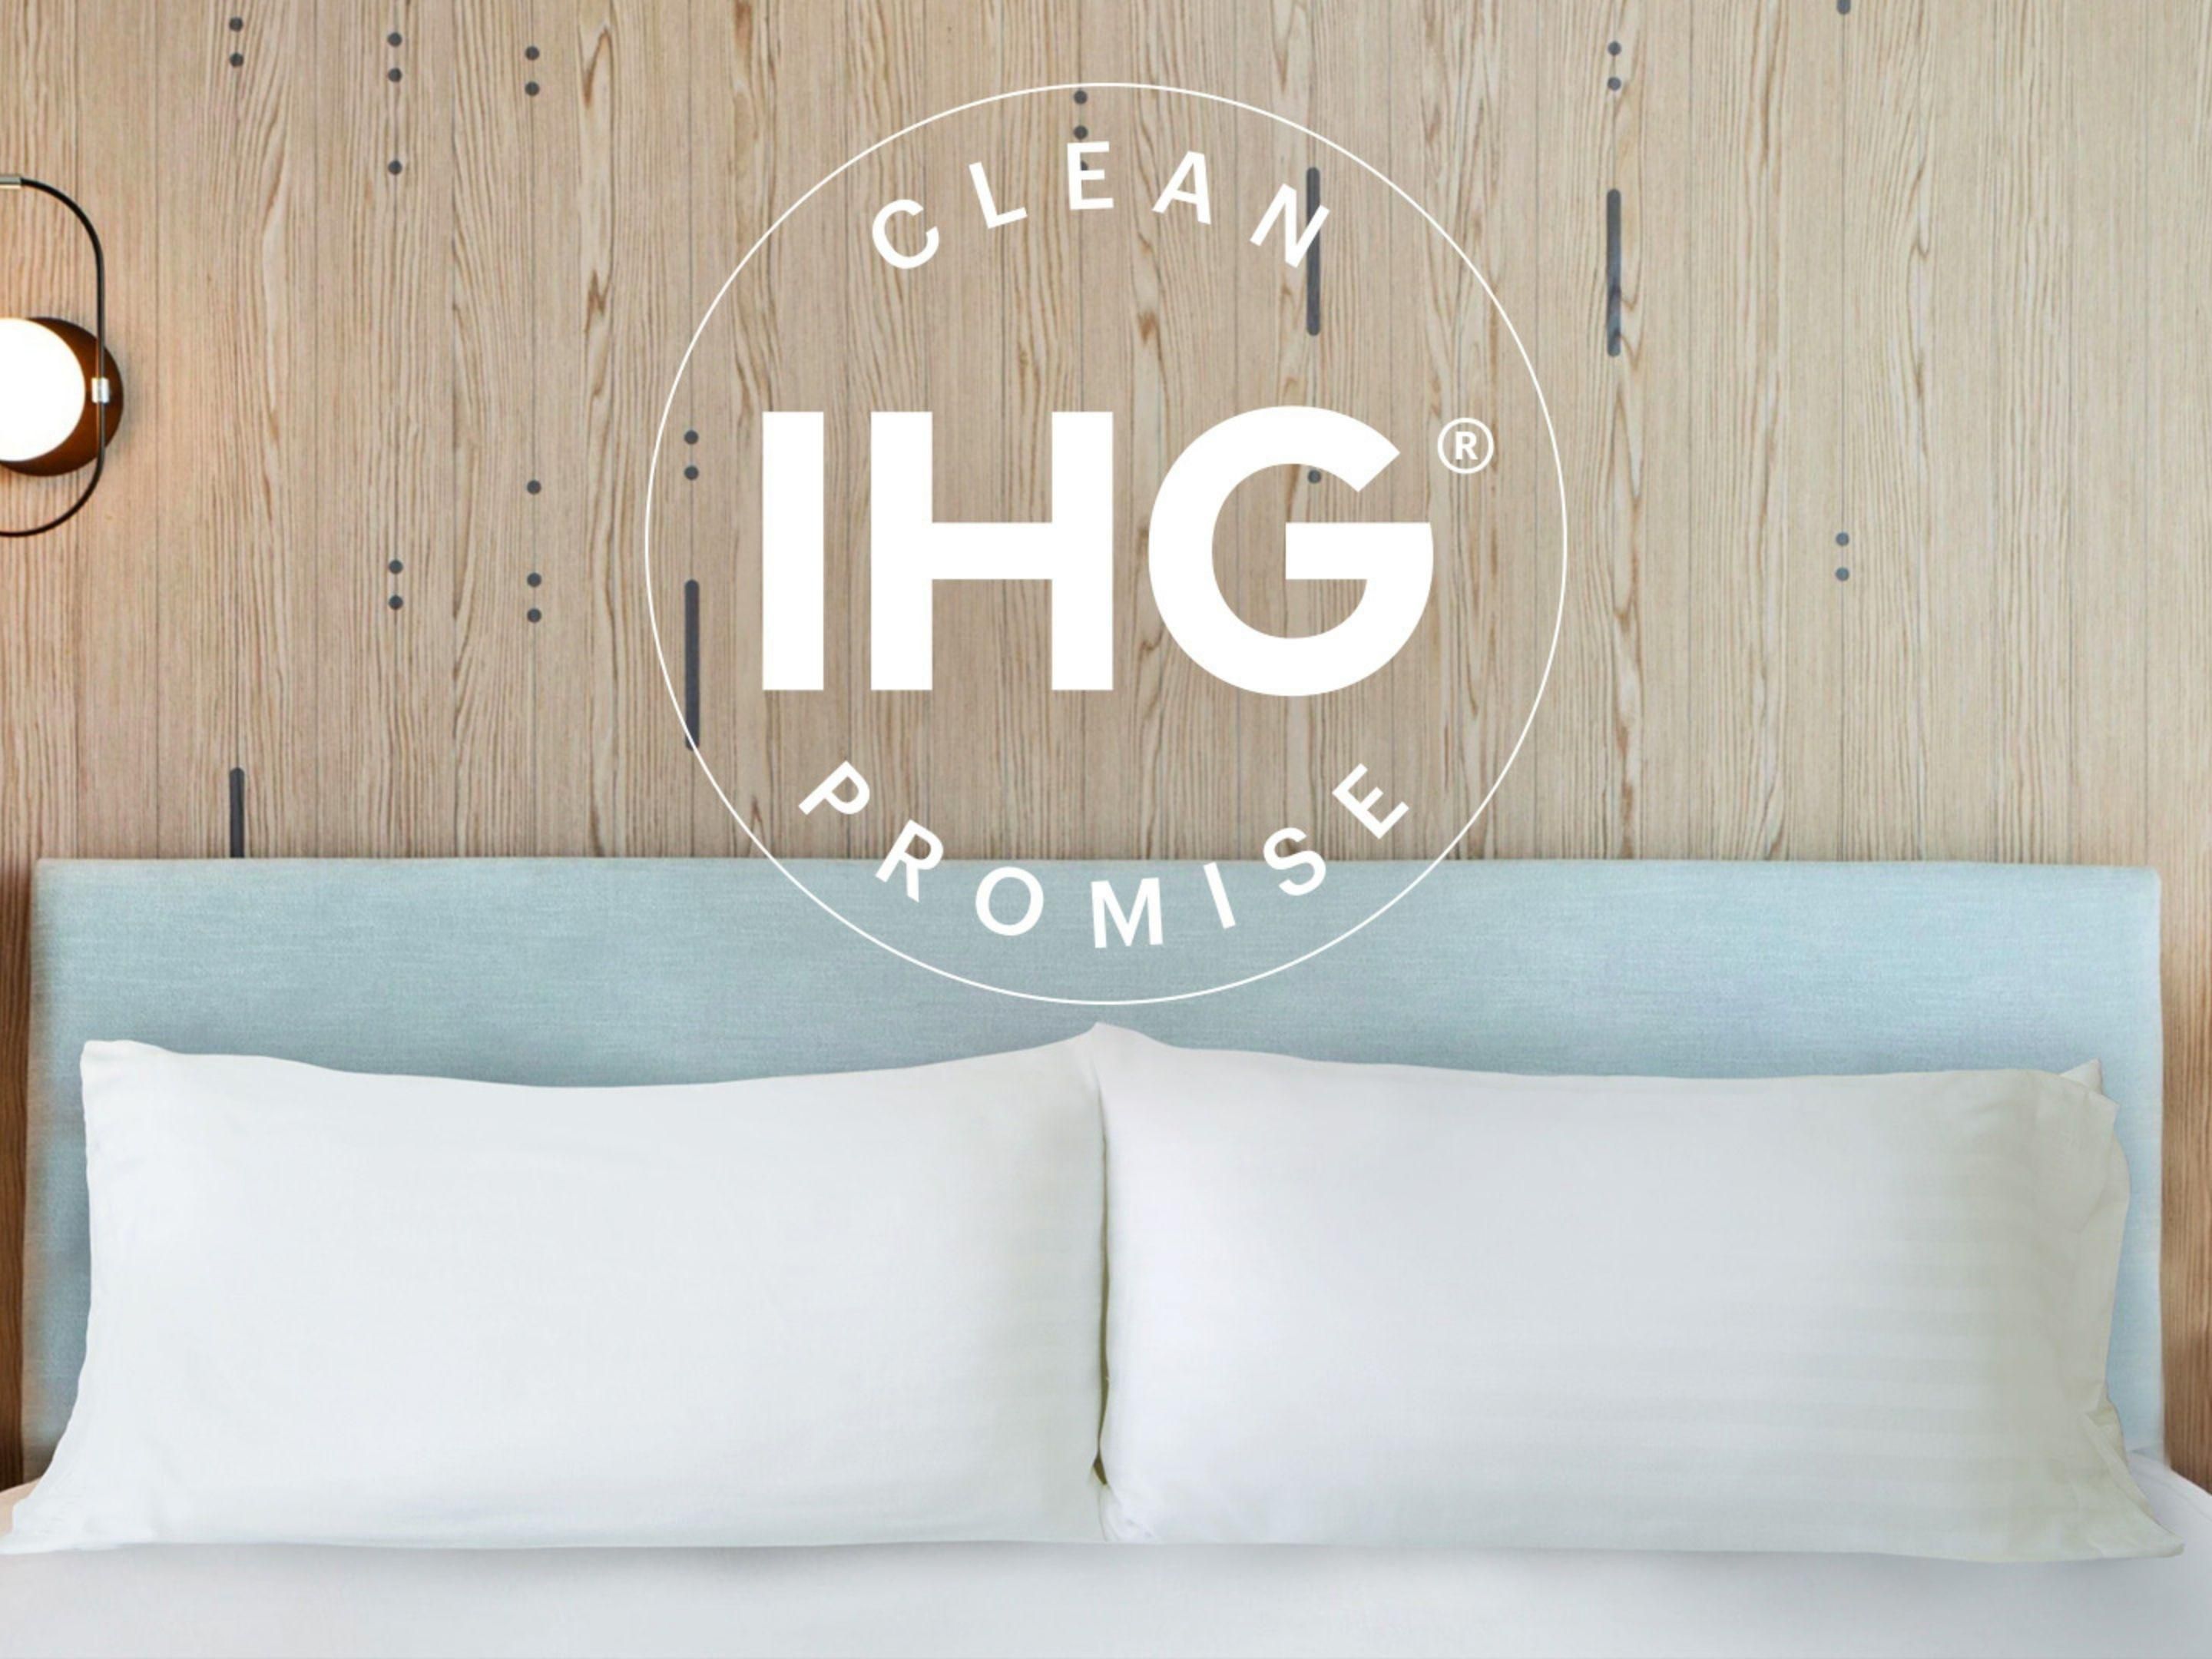 As the world adjusts to new travel norms and expectations, we’re enhancing the experience for you – our hotel guests – by redefining cleanliness and supporting your wellbeing throughout your stay. IHG Way of Clean already includes deep cleaning with hospital-grade disinfectants, and guests can expect to see evolved procedures throughout the hotel.